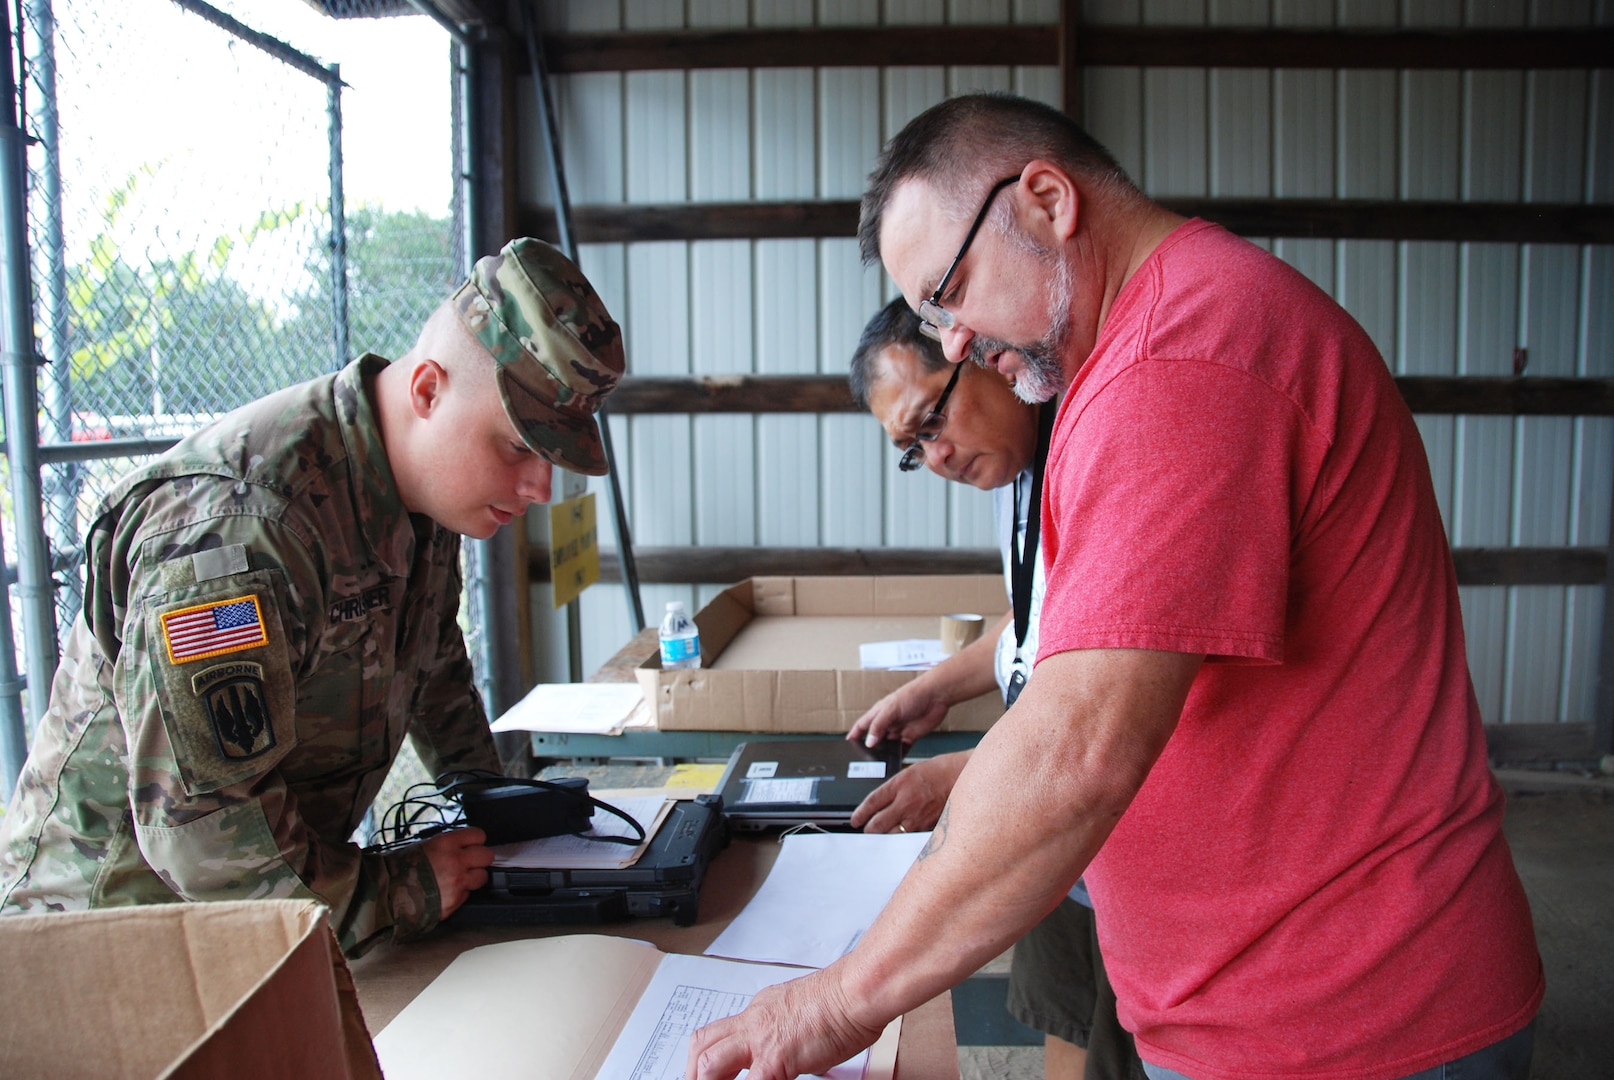 Serial numbers are just one of the important details included on turn-in documents. Units spend months preparing equipment and paperwork before DLA representatives arrive at their locations for turn-ins. 